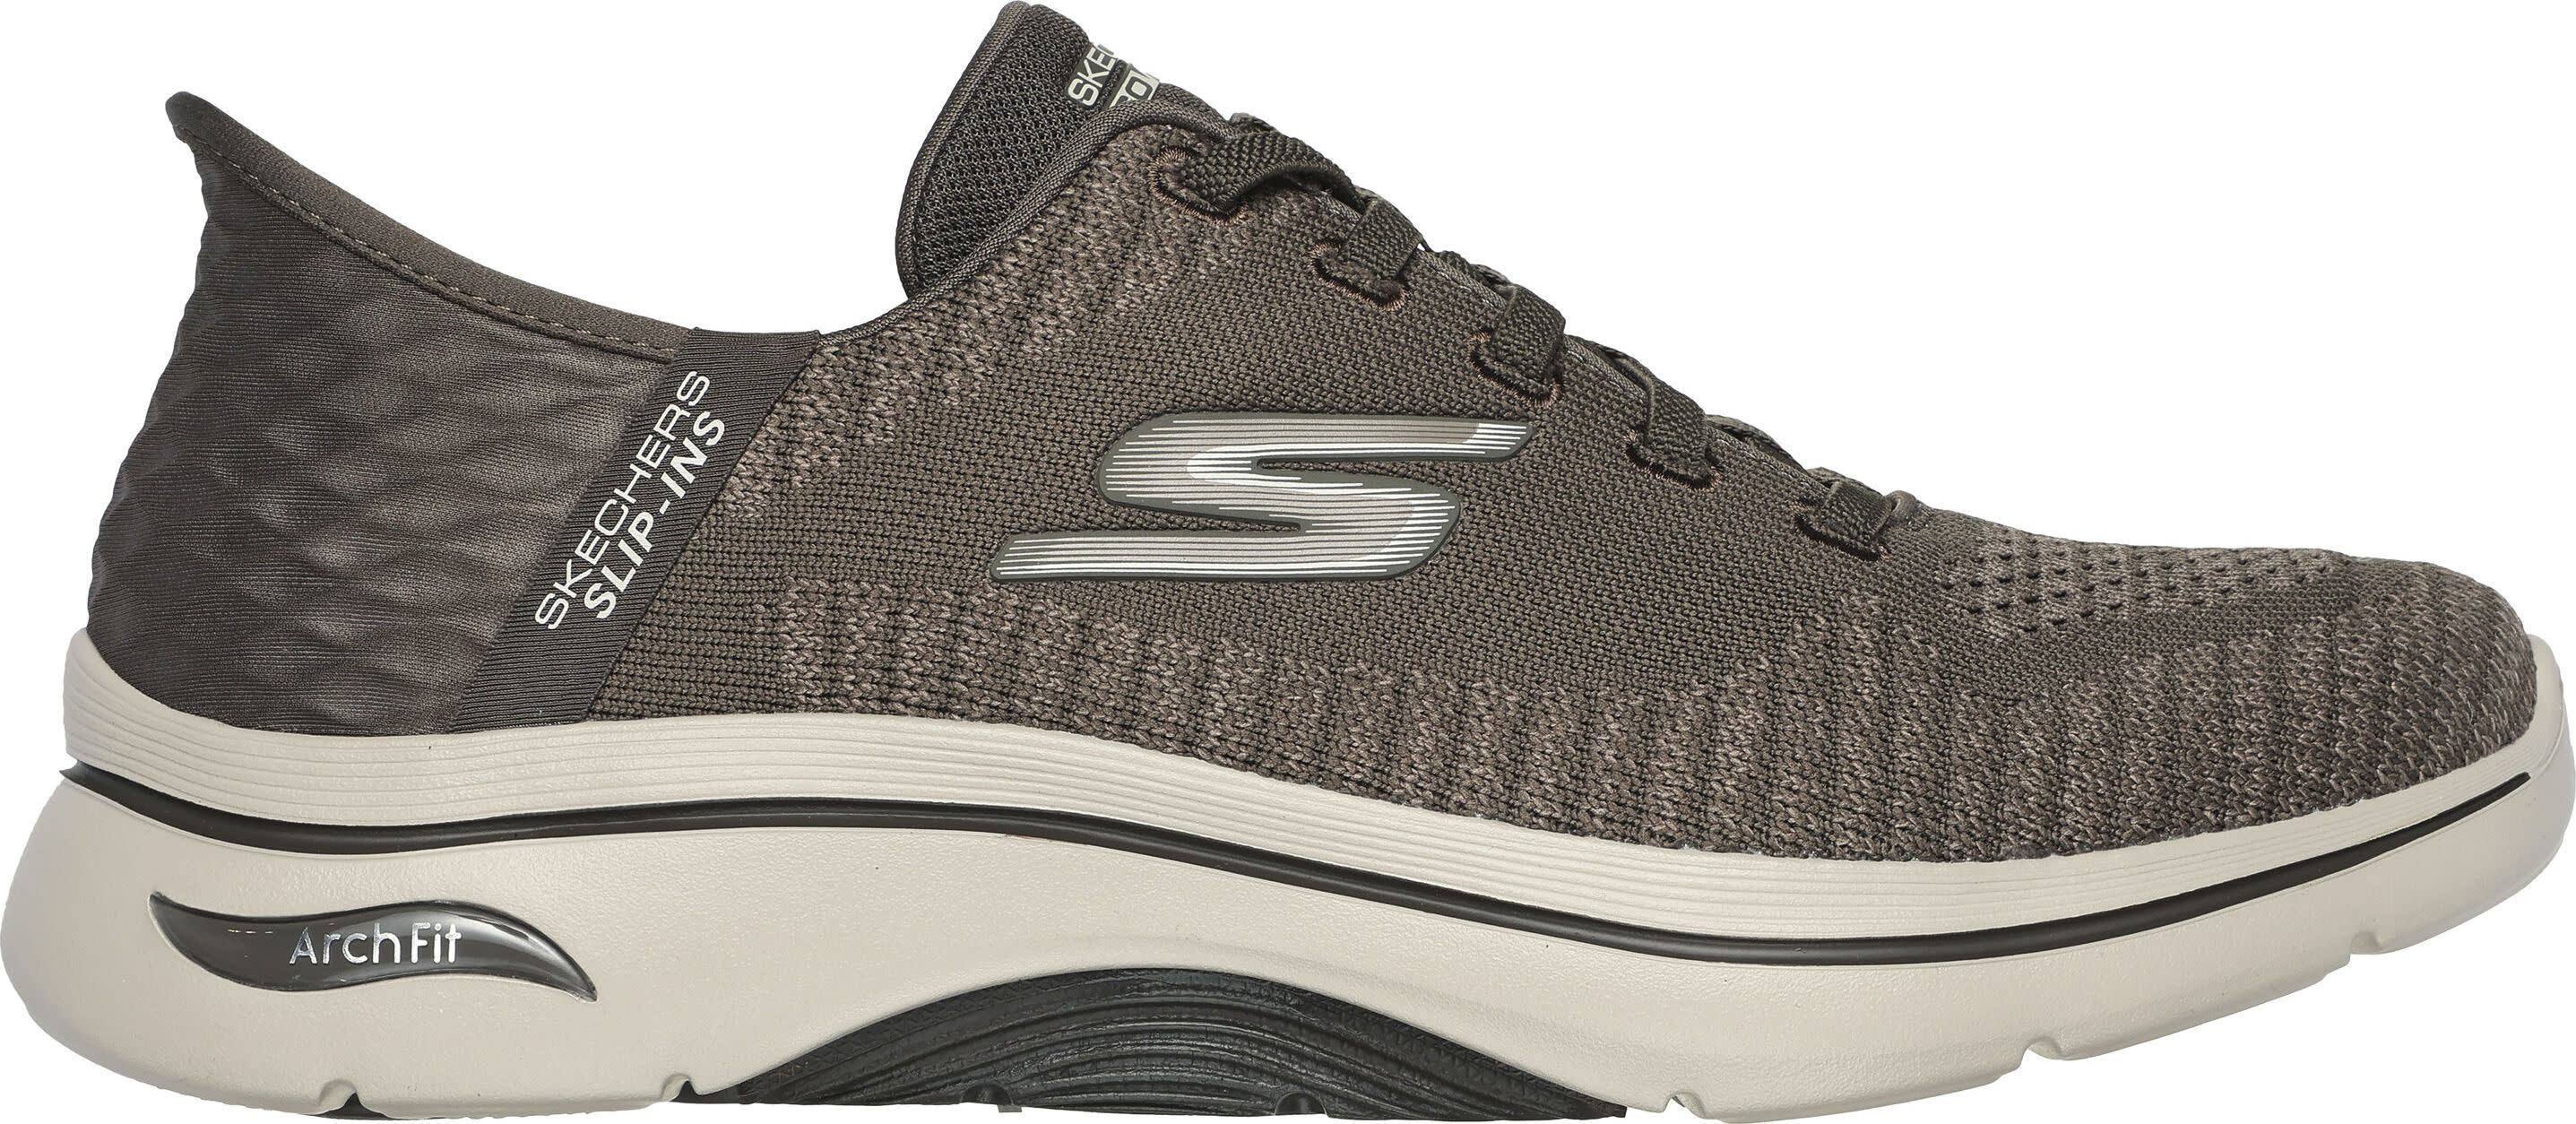 Skechers Men’s Slip-ins GO WALK Arch Fit 2.0 – Grand Select 2 Taupe